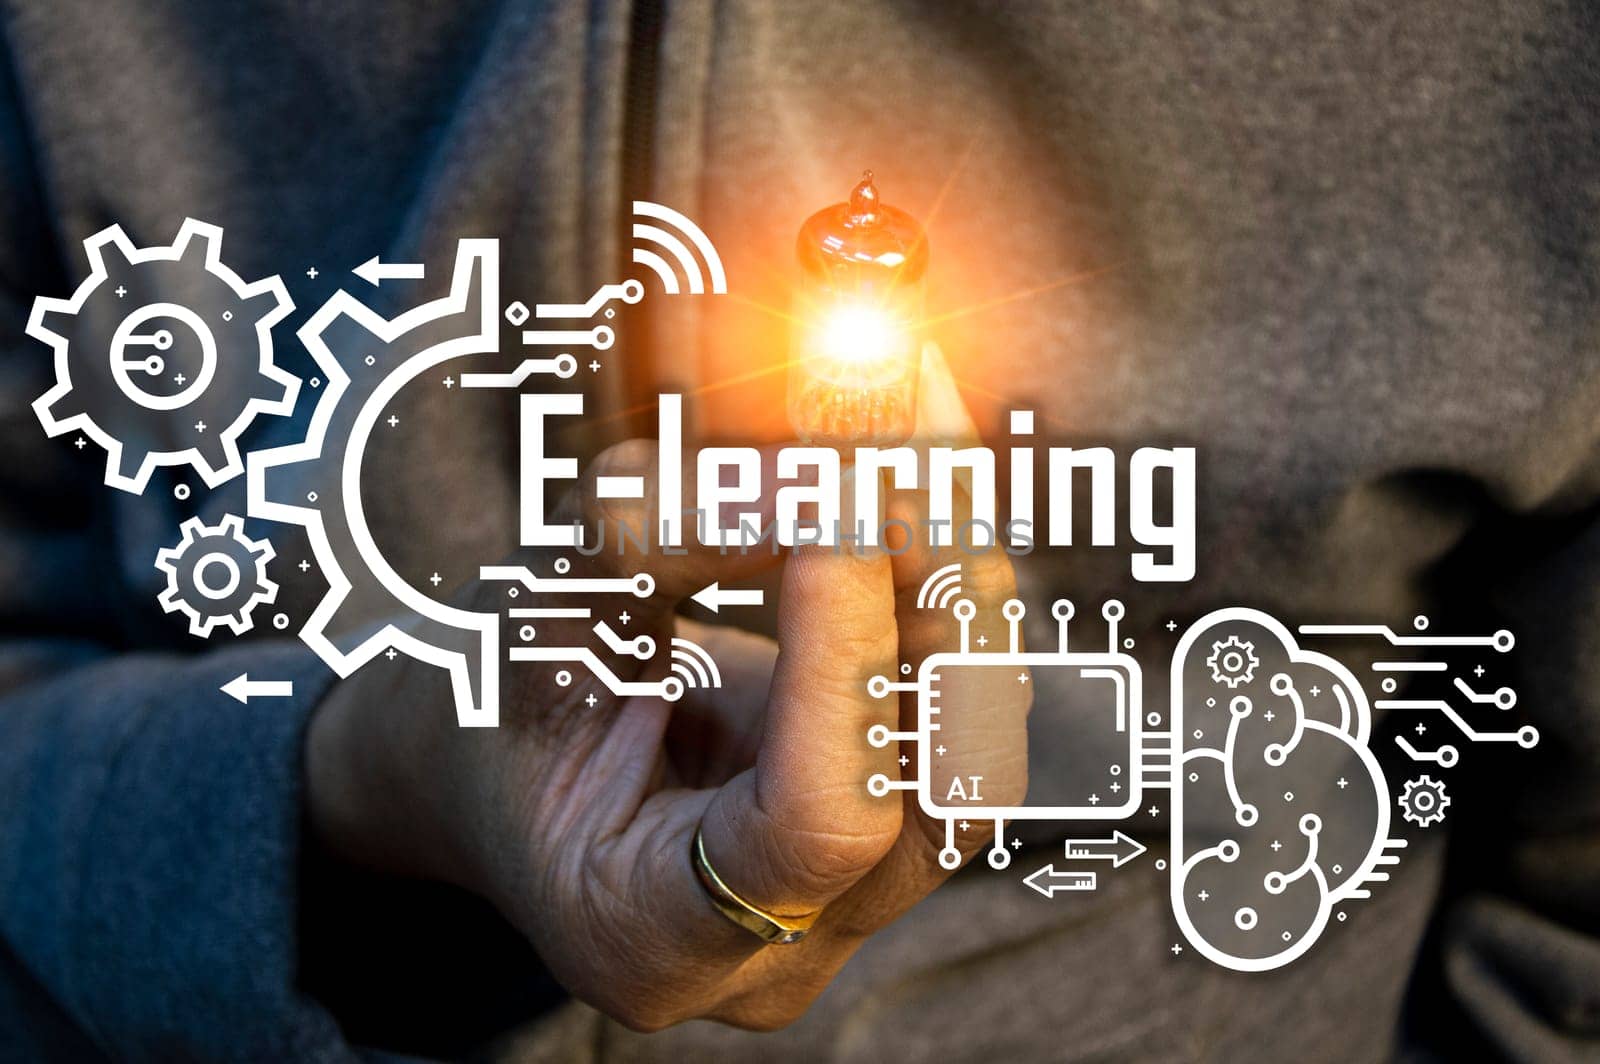 Concept of e-Learning, a learning management system through a network (Learning Management System) with an emphasis on learners as the center. in teaching and learning Blended style with regular class by boonruen